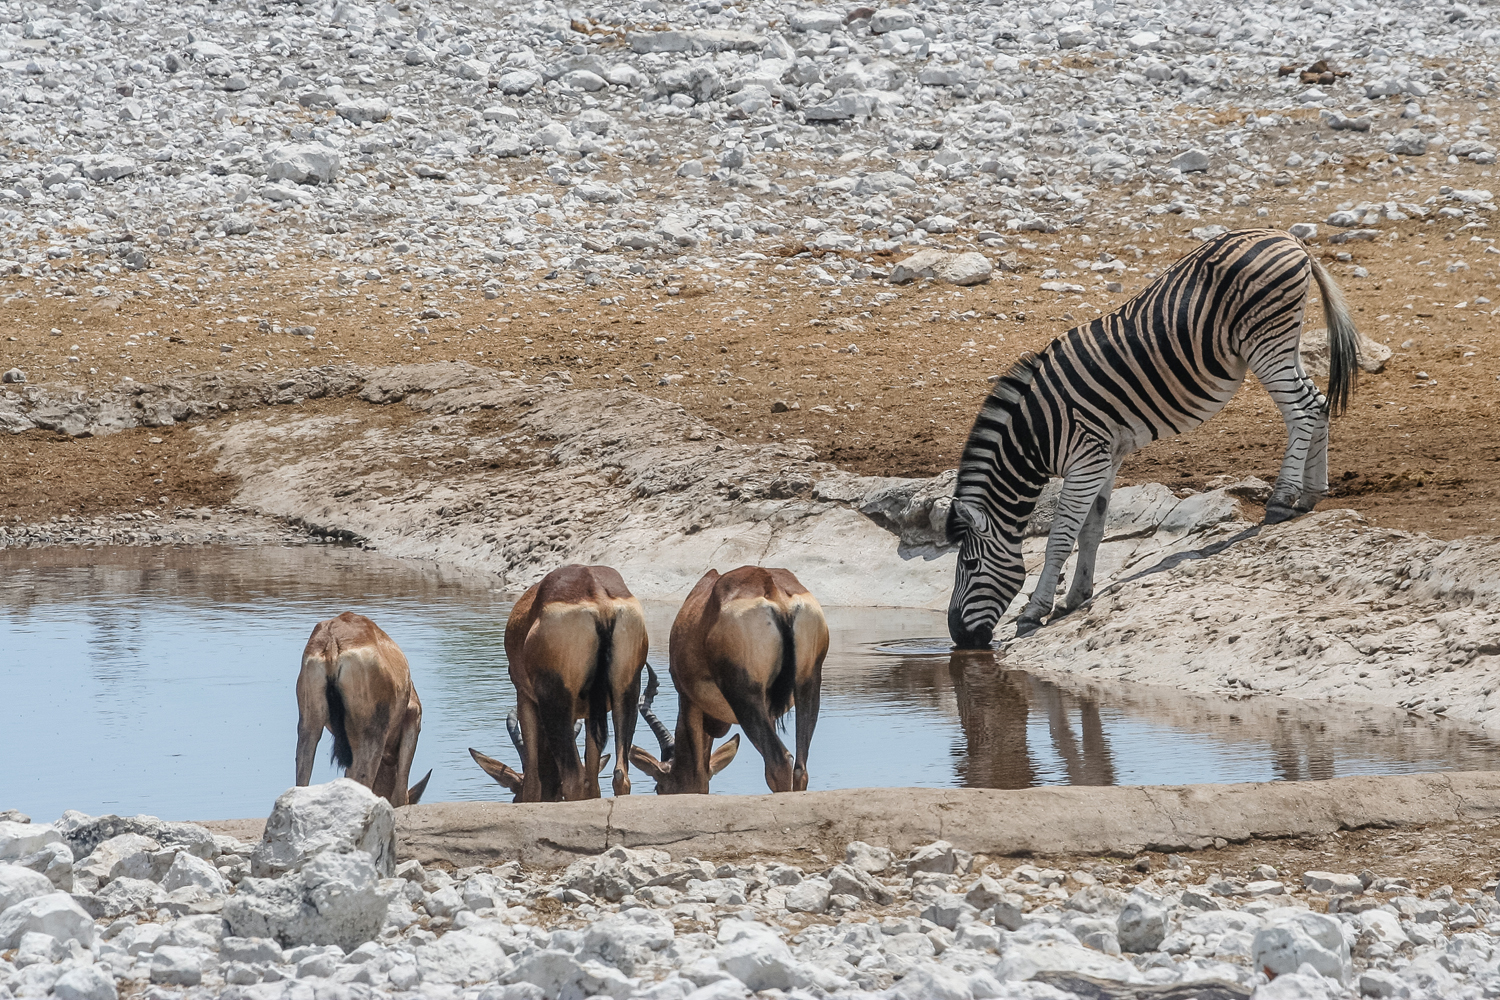 Zebra and red hartebeest share water at one of Etosha National Park’s watering holes